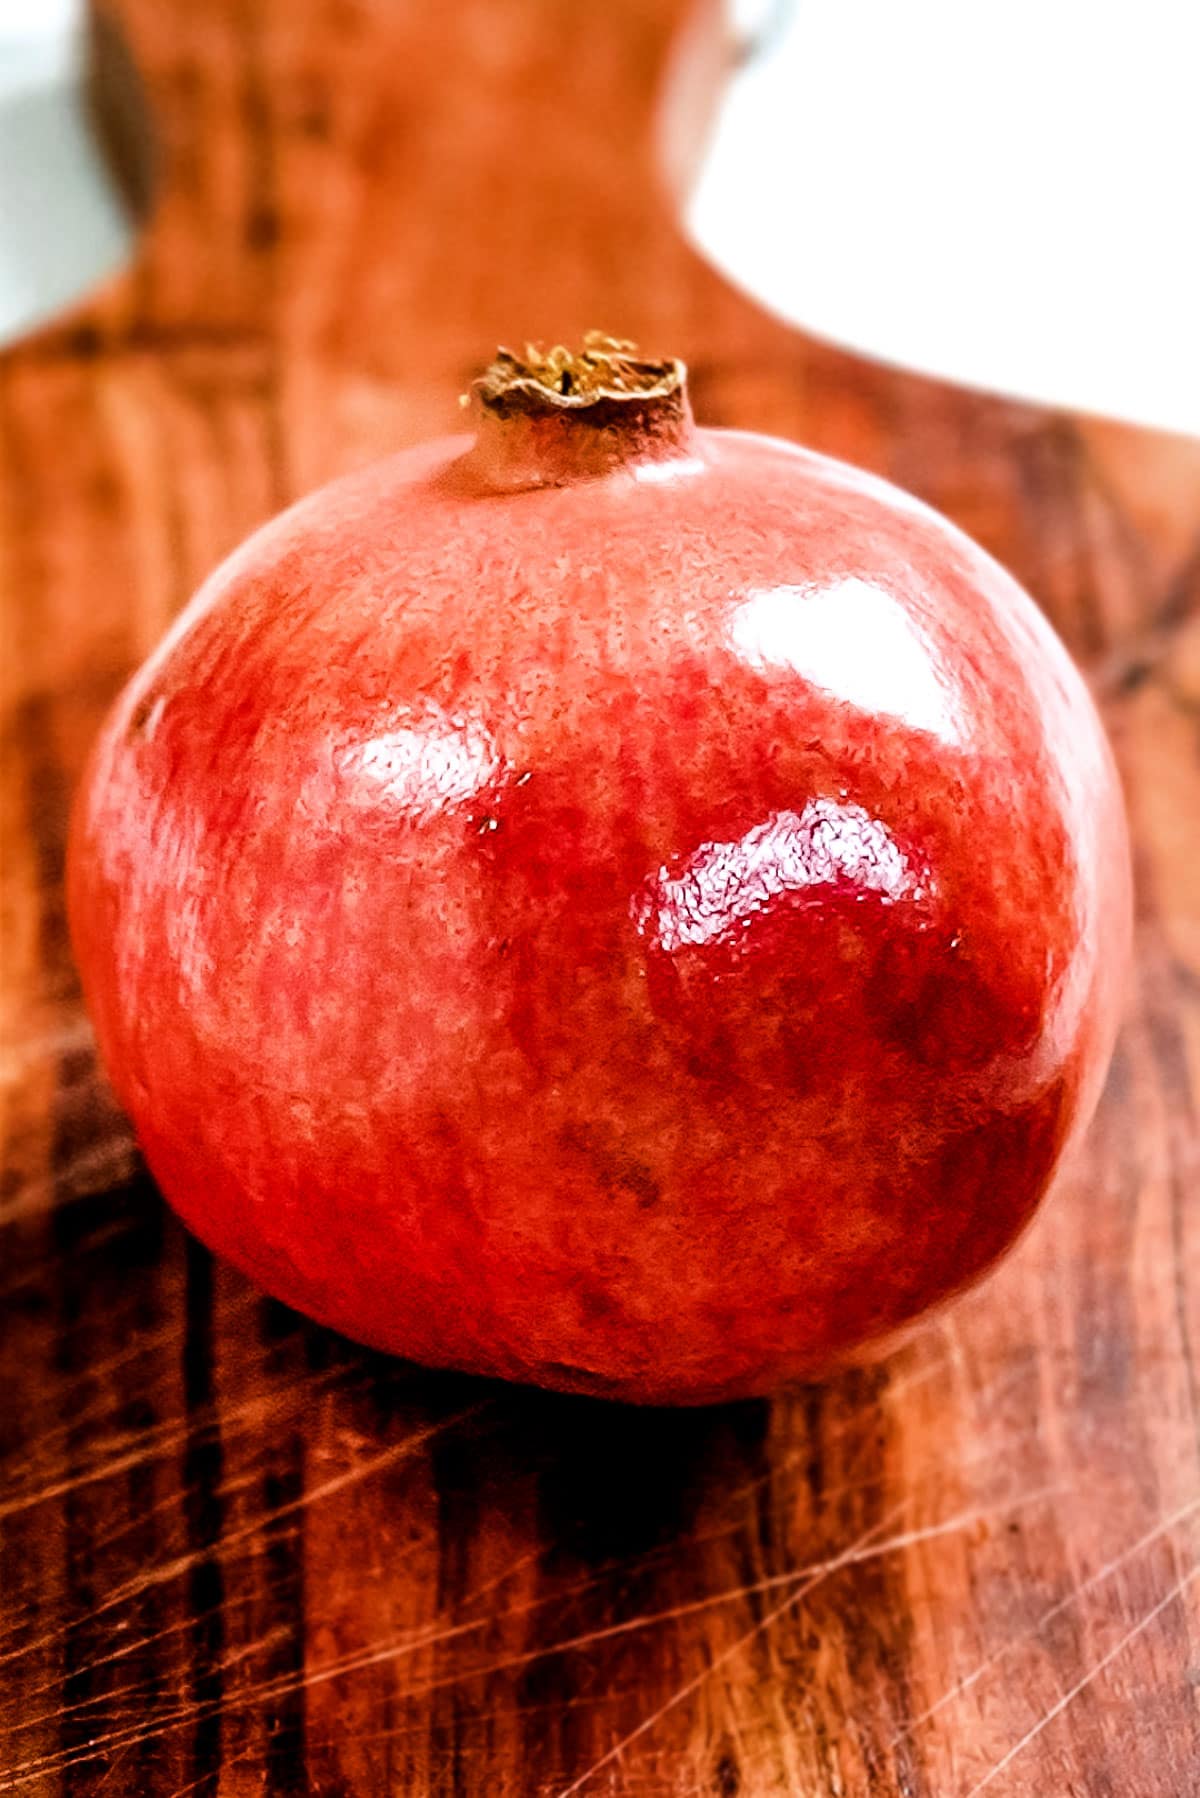 An in-tact pomegranate on a wooden cutting board.